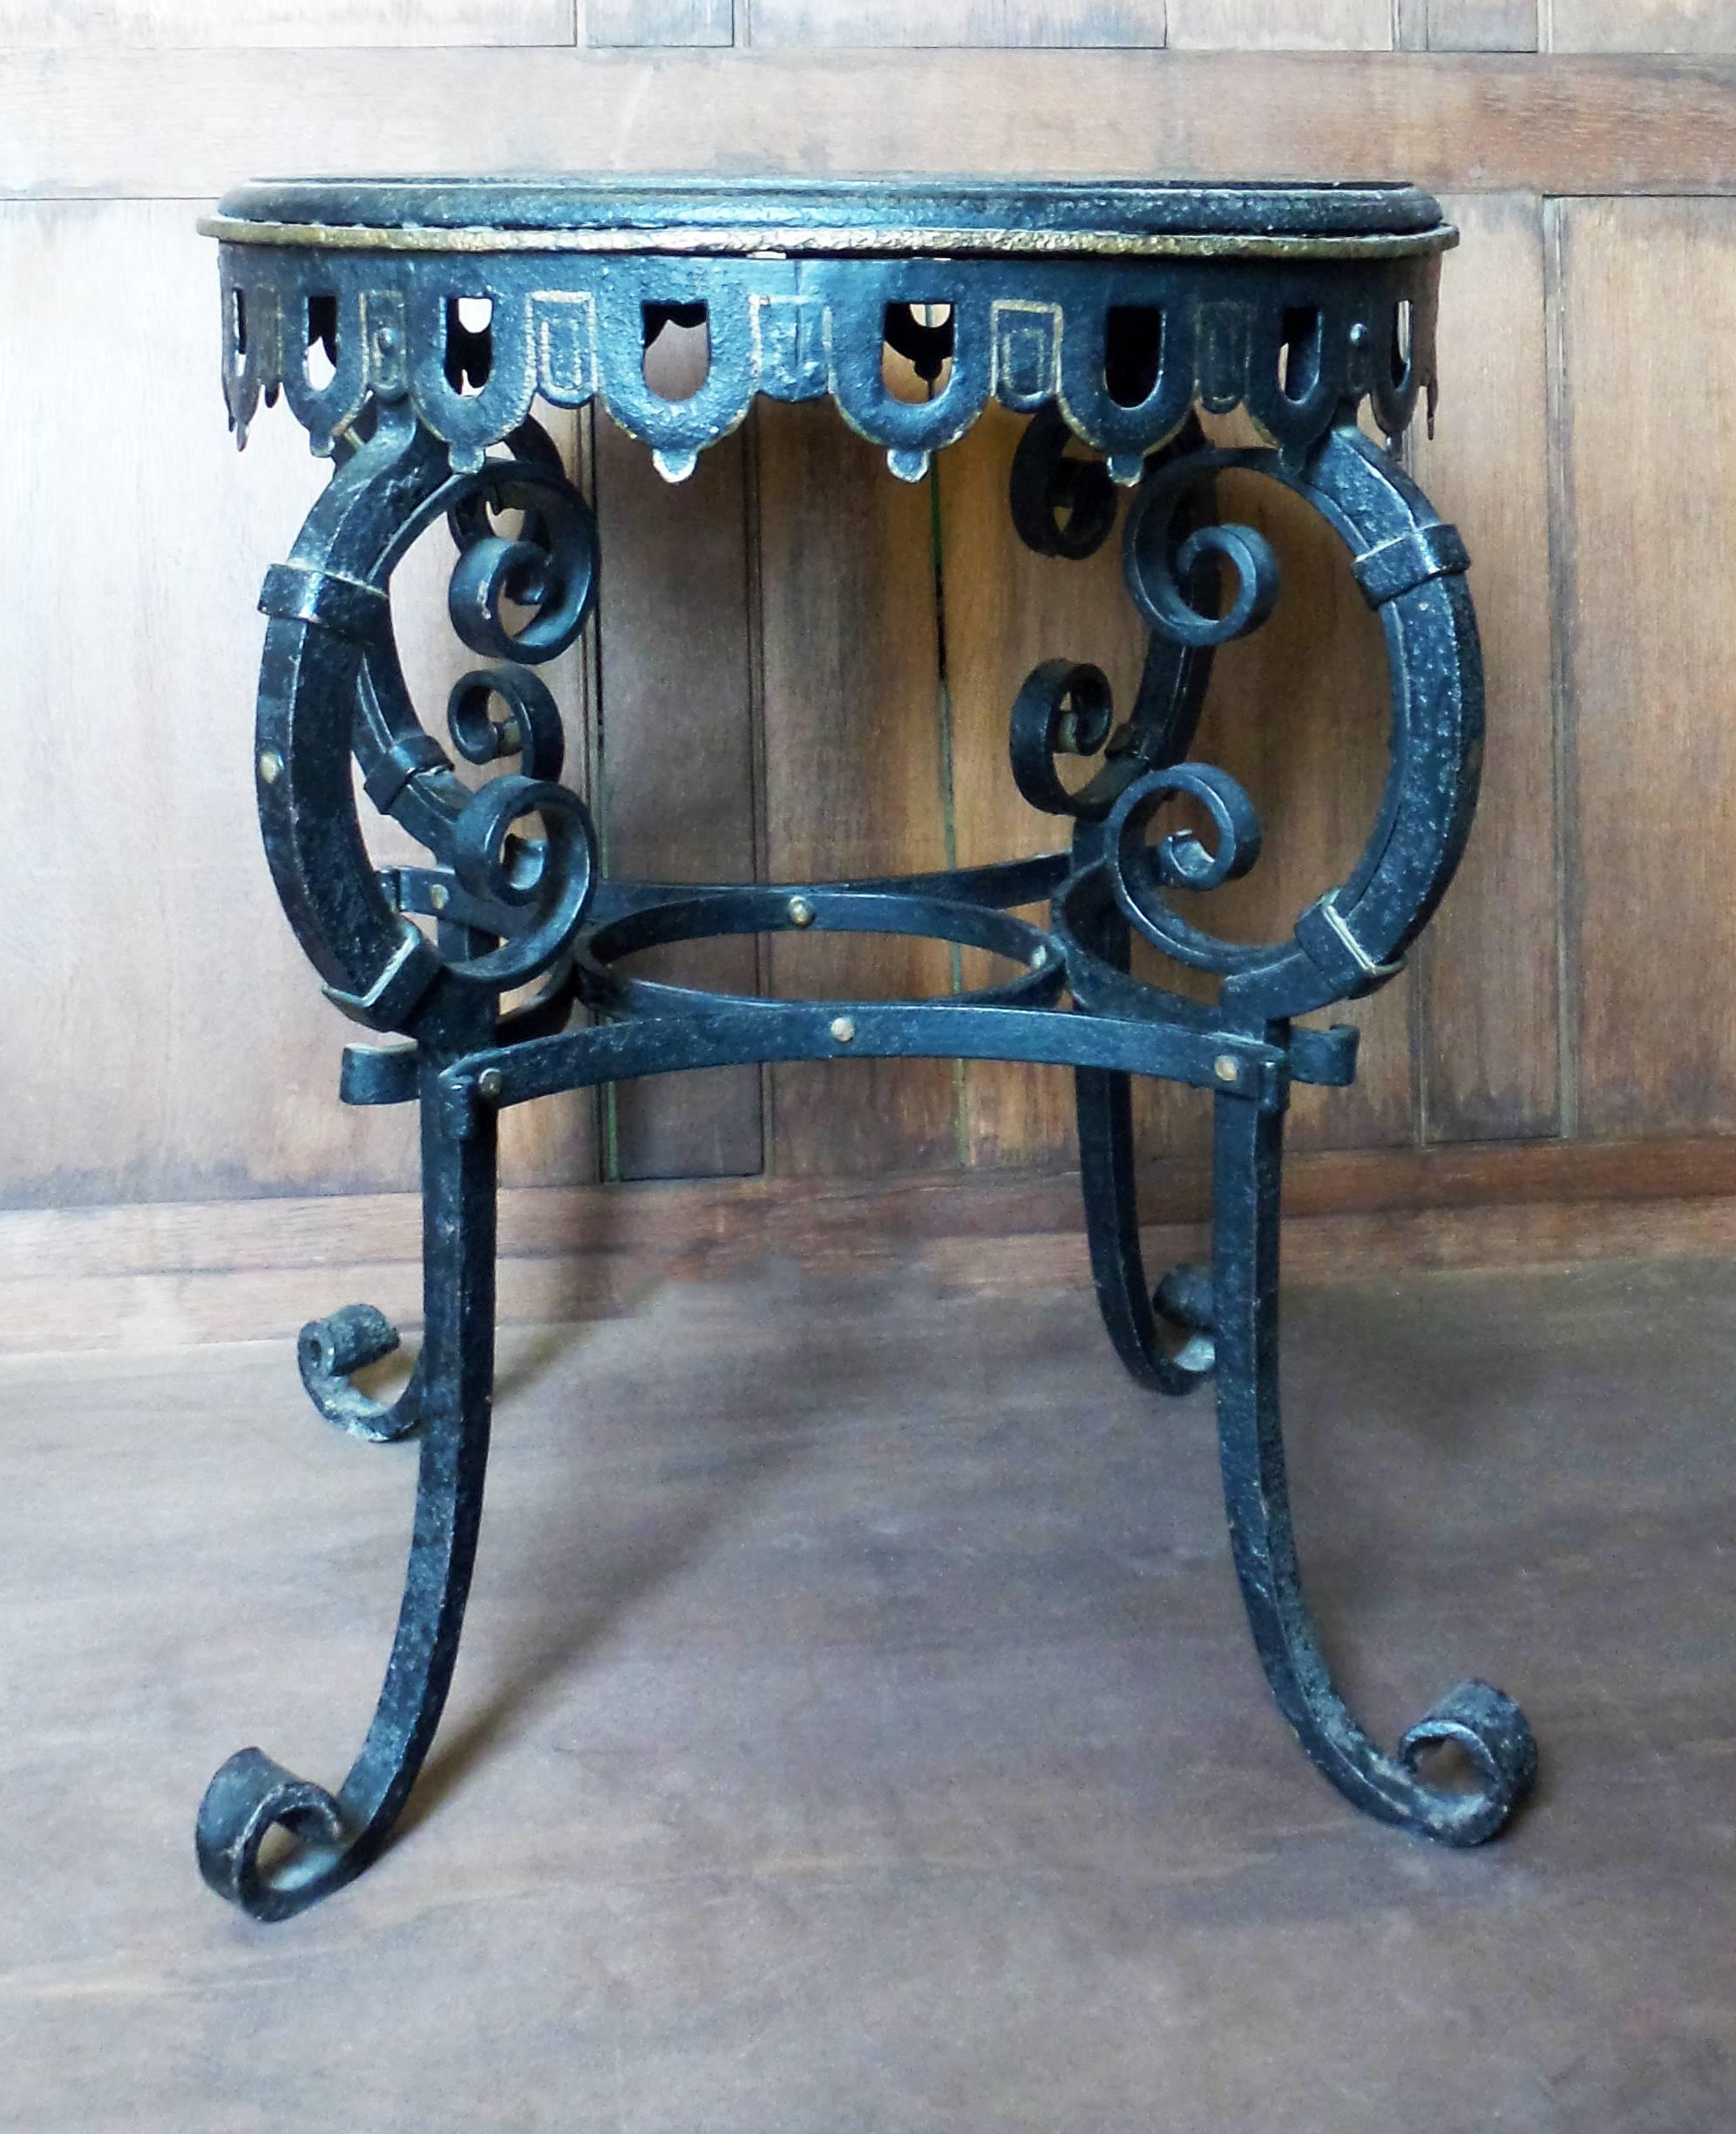 An antique French circular iron table, with four decorative scrolling iron legs and an iron strap and riveted form stretcher, circa 1870, France.